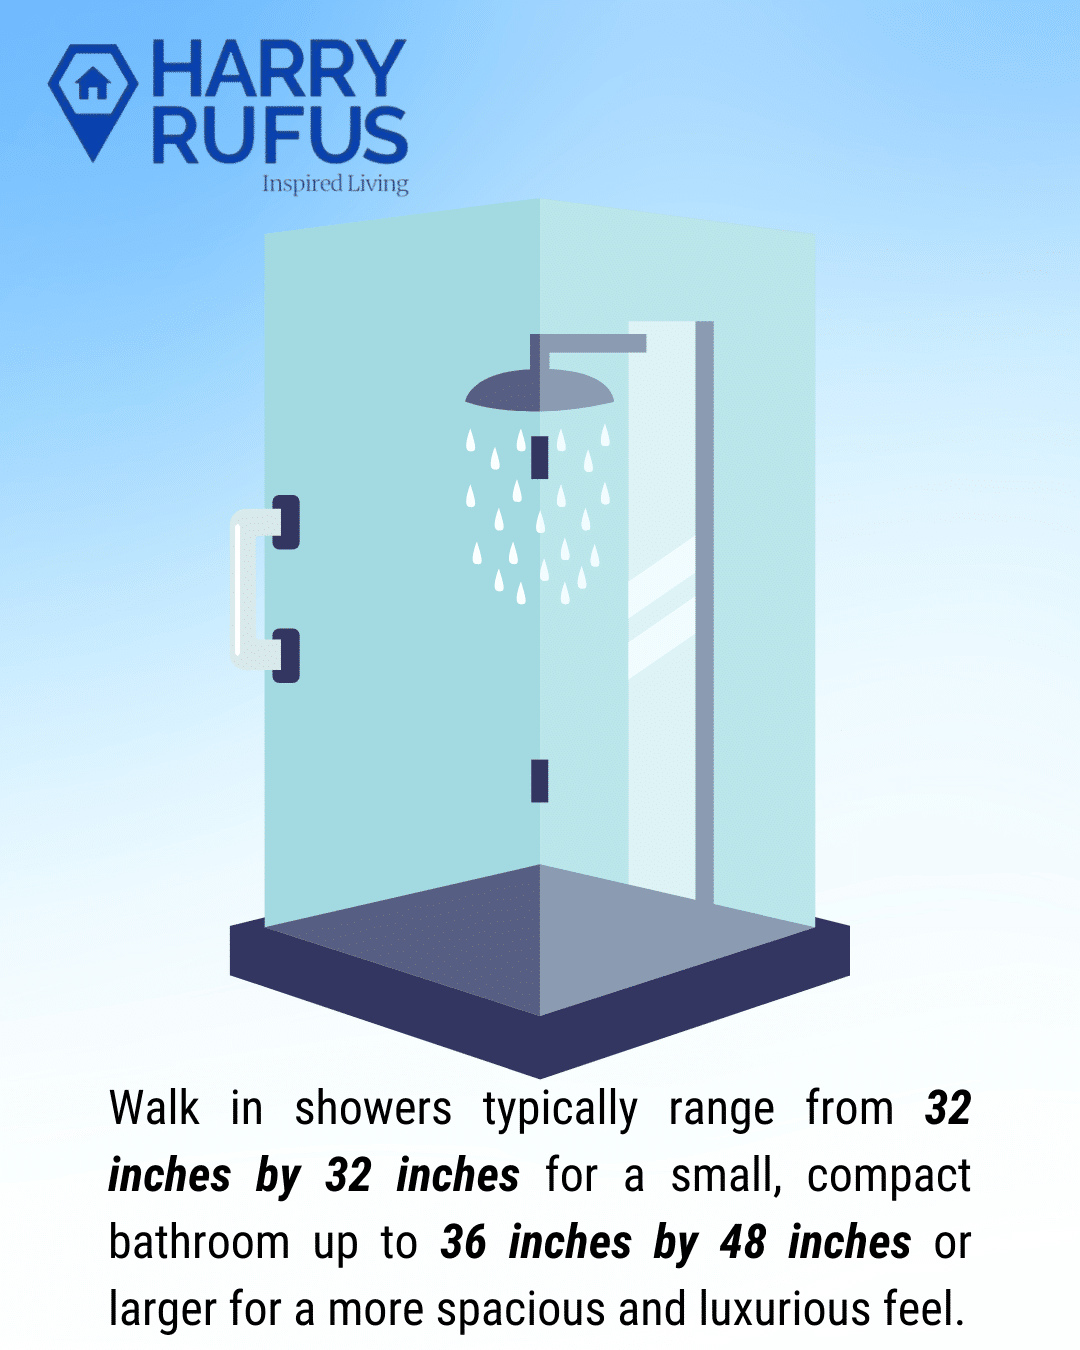 walk in shower graphics with text indicating its size ranges depending on bathroom sizes